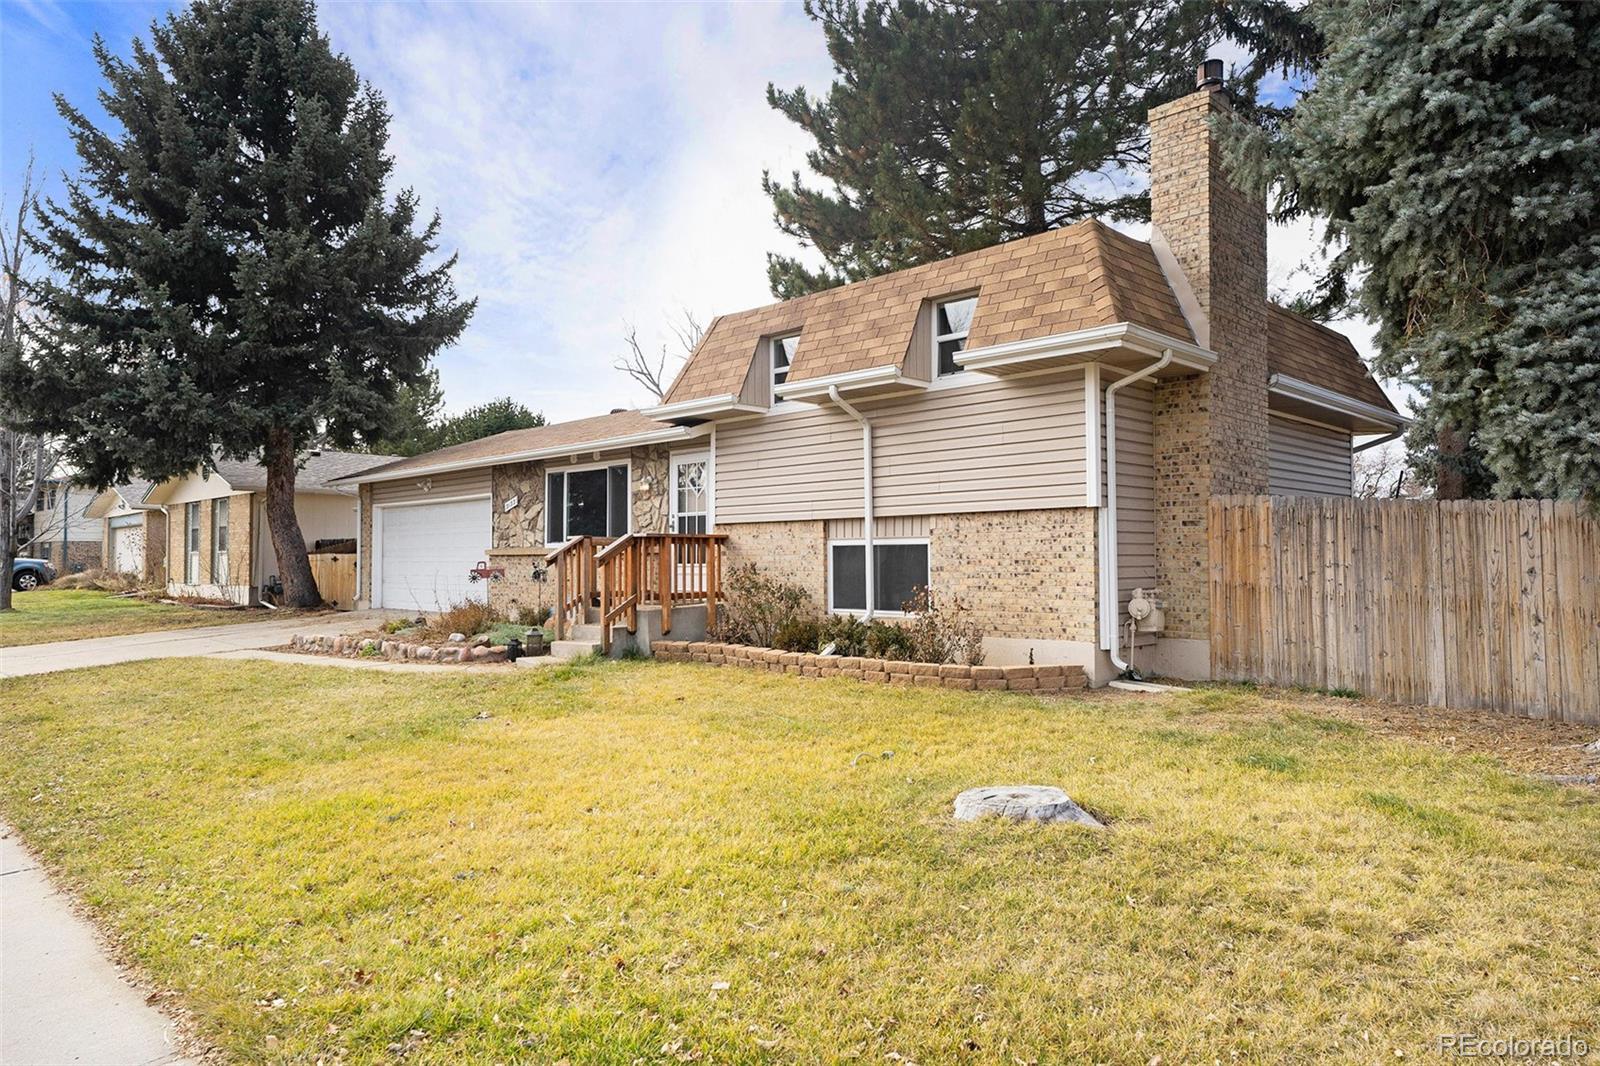 3133 s boston court, Denver sold home. Closed on 2024-02-06 for $572,000.